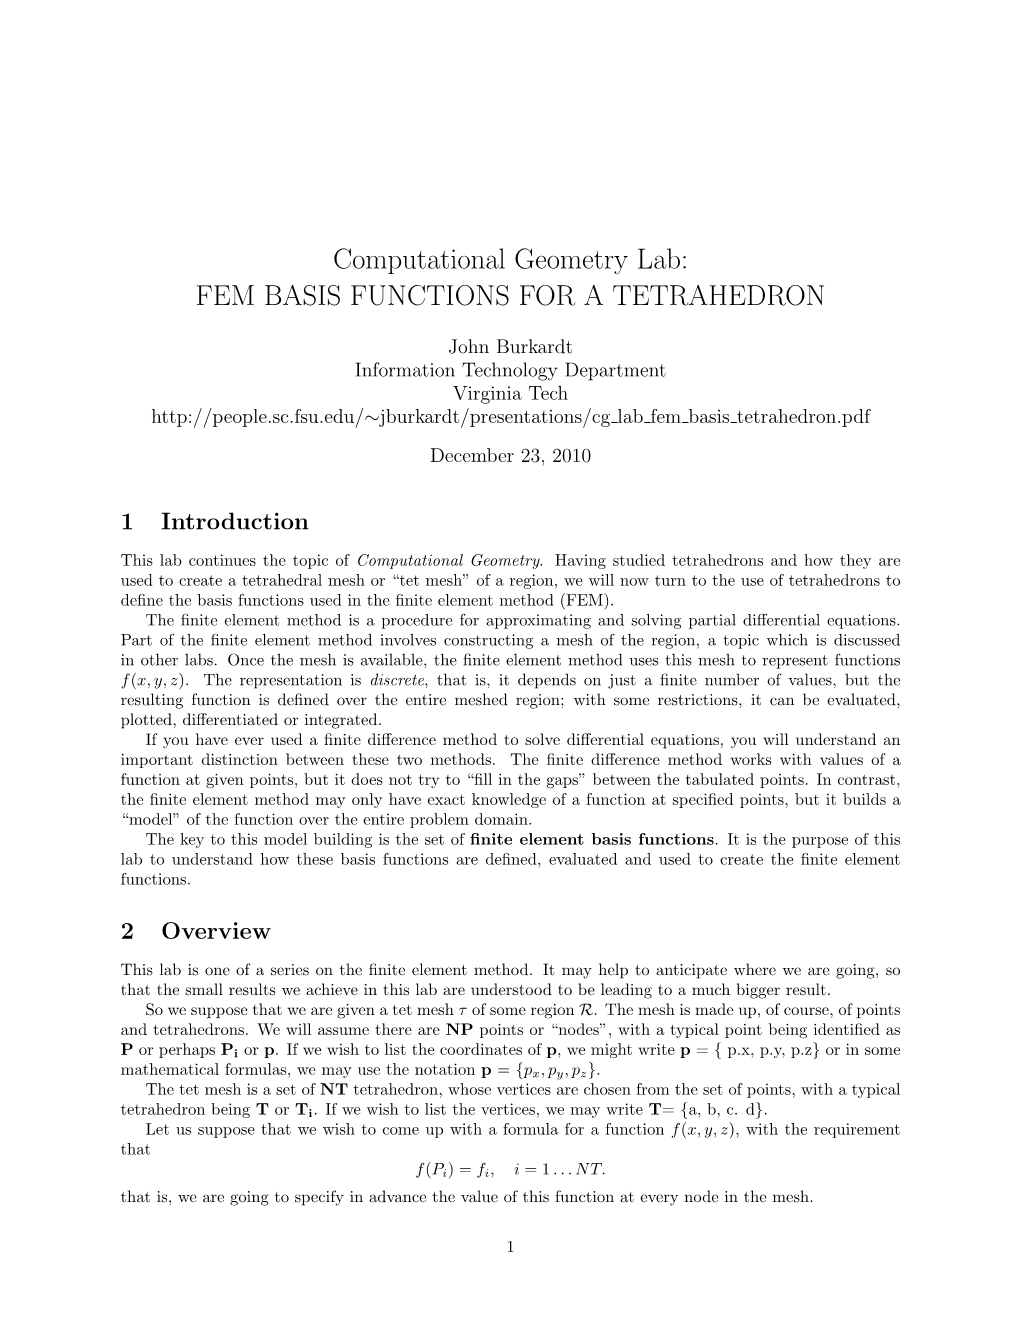 Computational Geometry Lab: FEM BASIS FUNCTIONS for a TETRAHEDRON